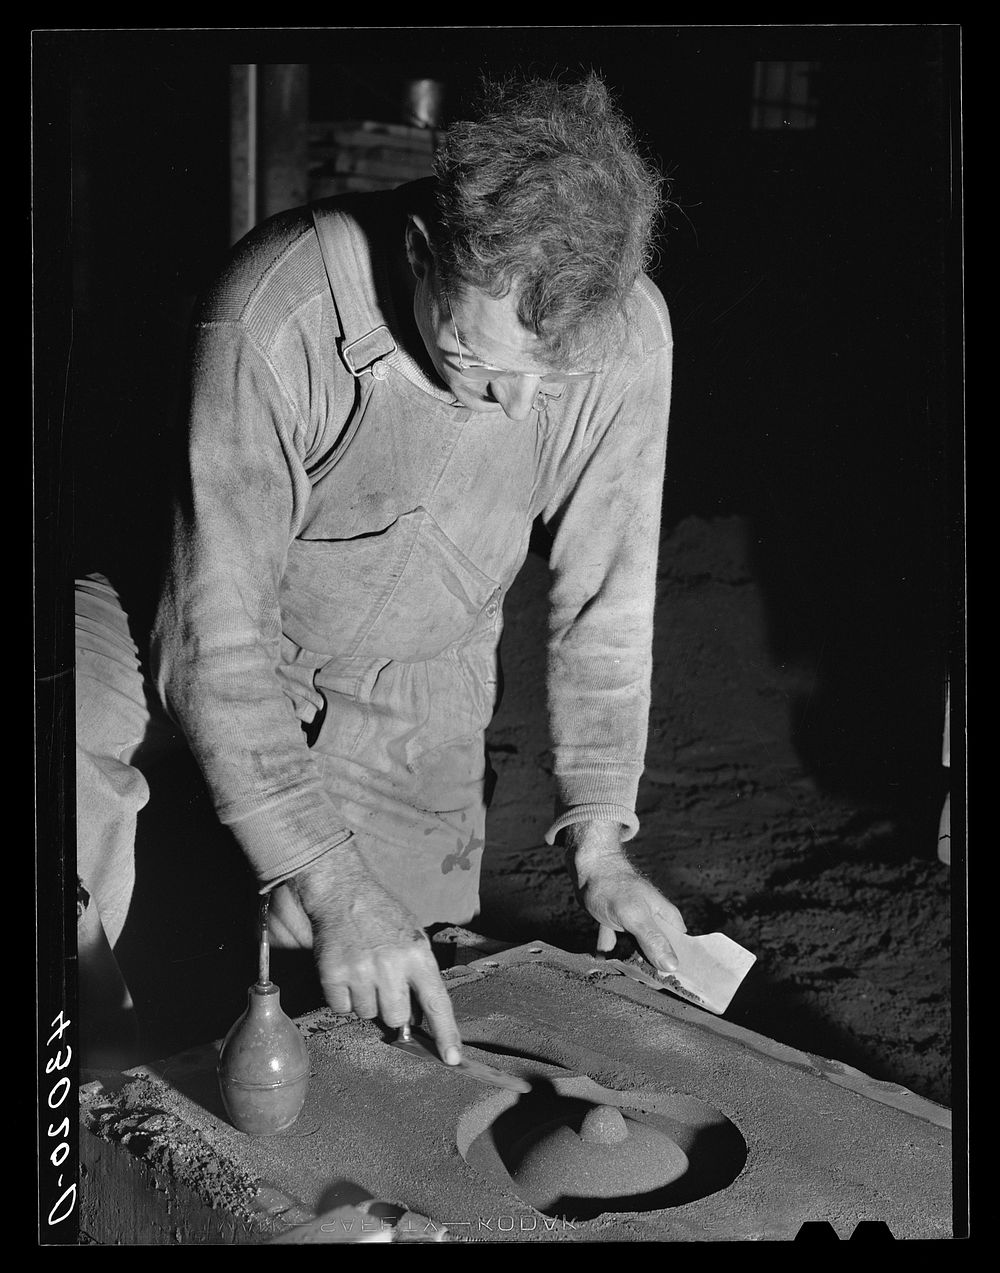 Moulder at Correct Manufacturing Company. Fallston, Pennsylvania. Sourced from the Library of Congress.